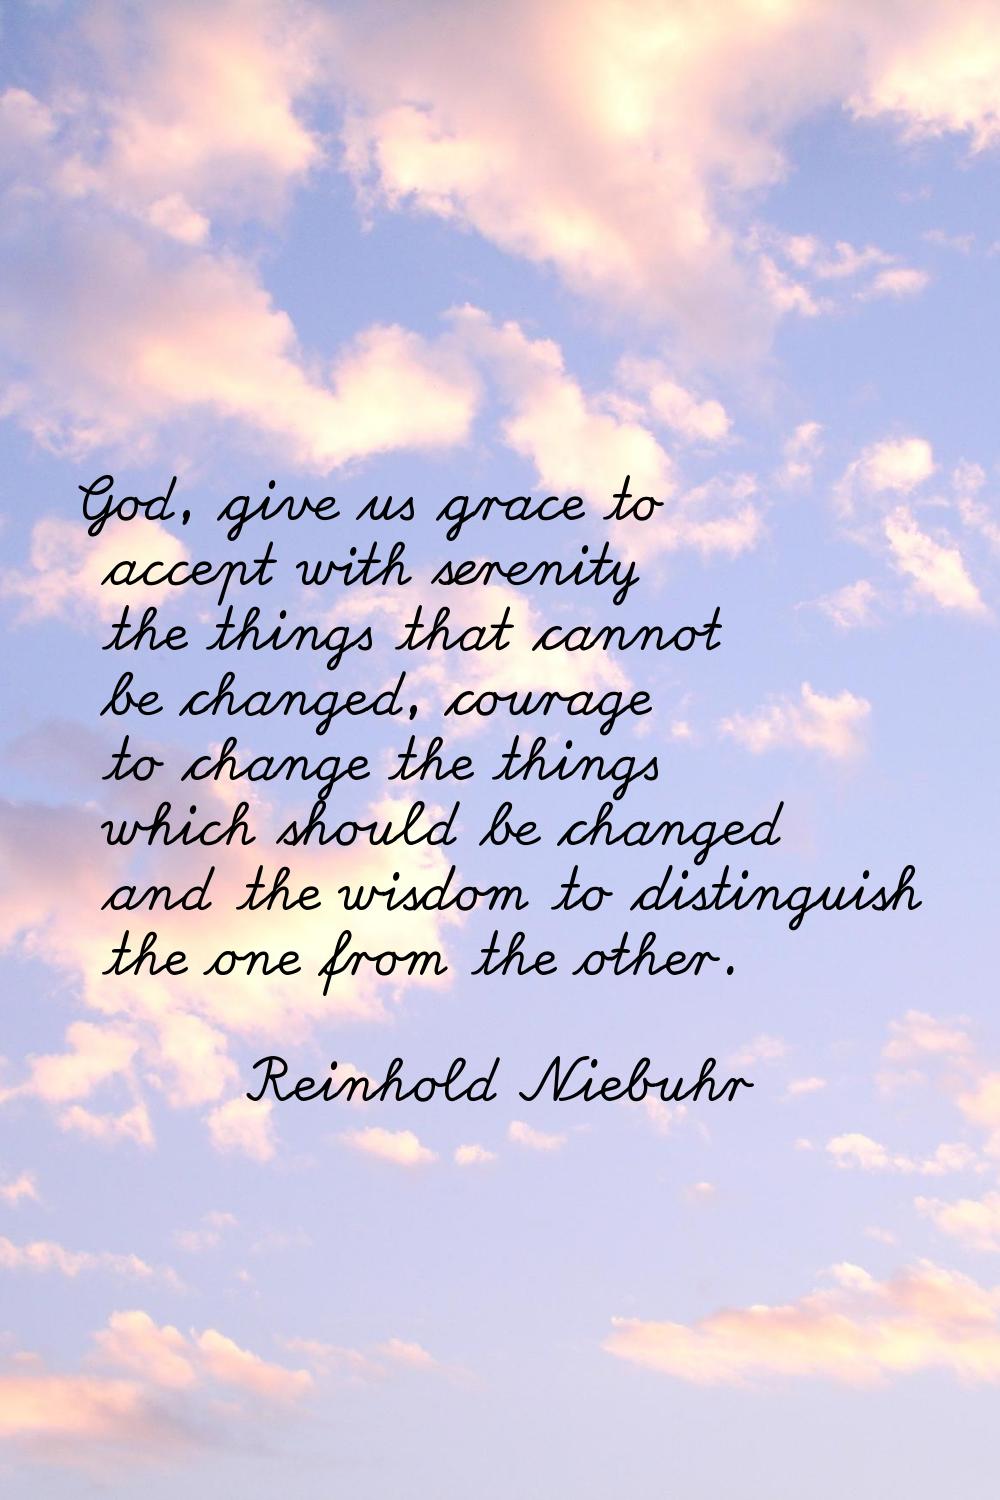 God, give us grace to accept with serenity the things that cannot be changed, courage to change the